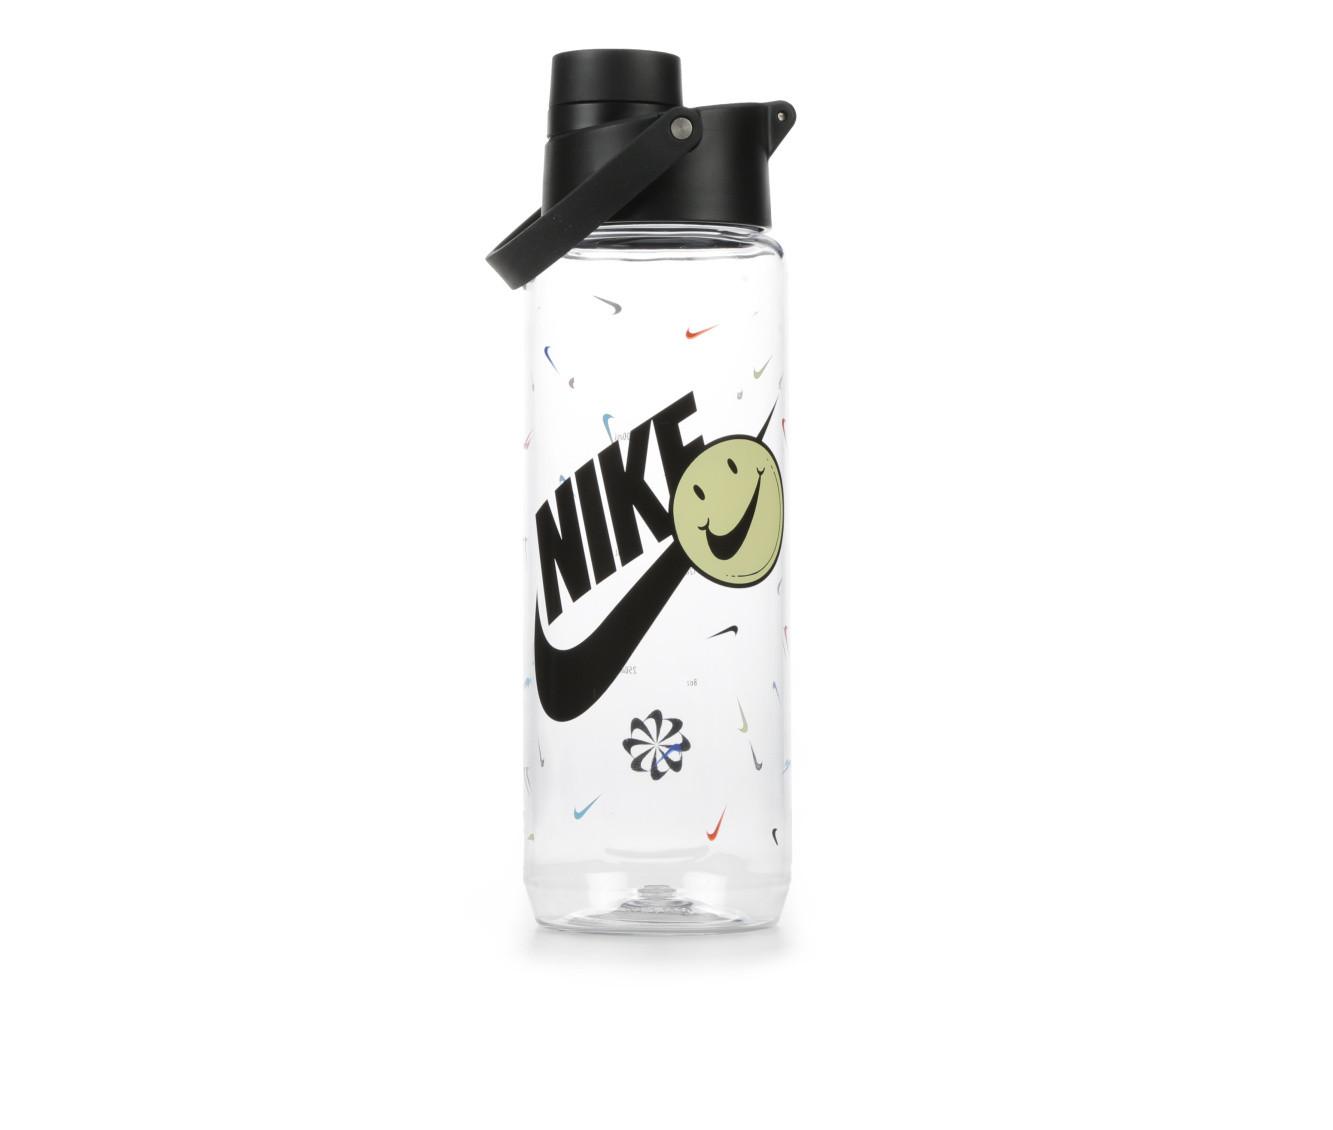 NIKE CHICAGO TWIST TOP INSULATED WATER BOTTLE 24 OZ BPA FREE